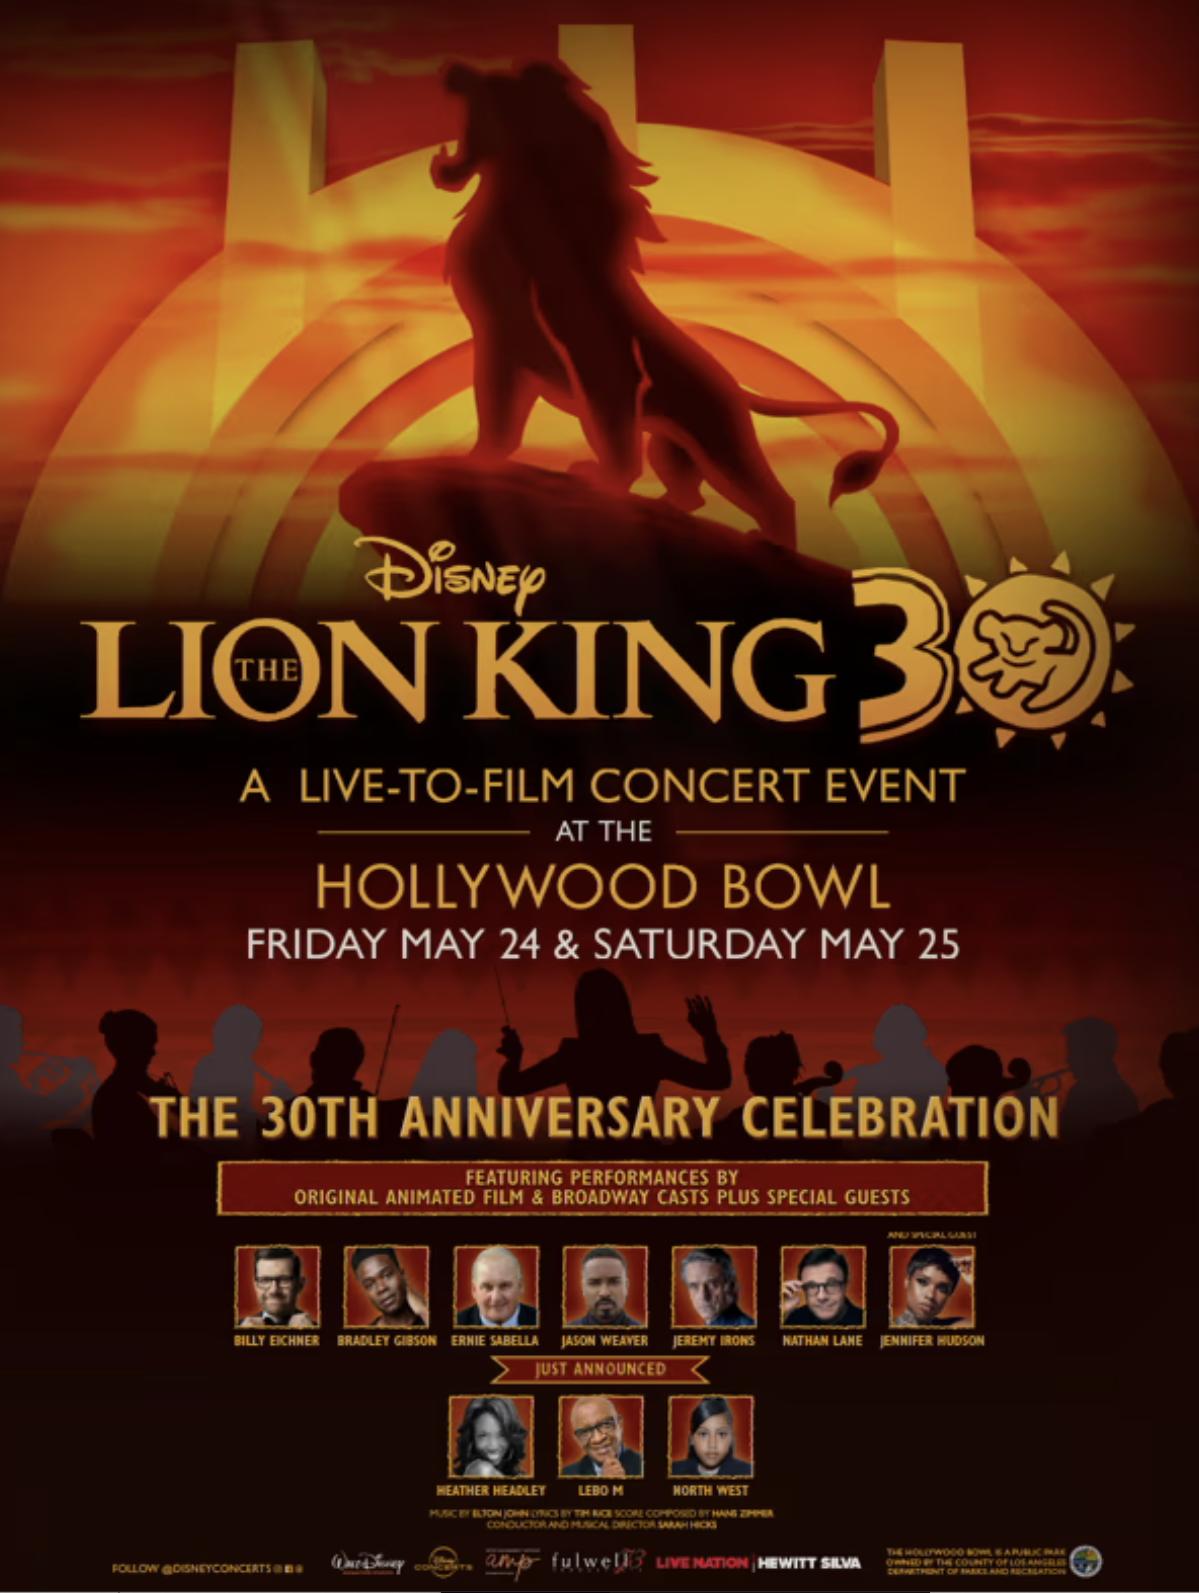 Disney’s The Lion King 30th Anniversary – A Live-to-Film Concert Event